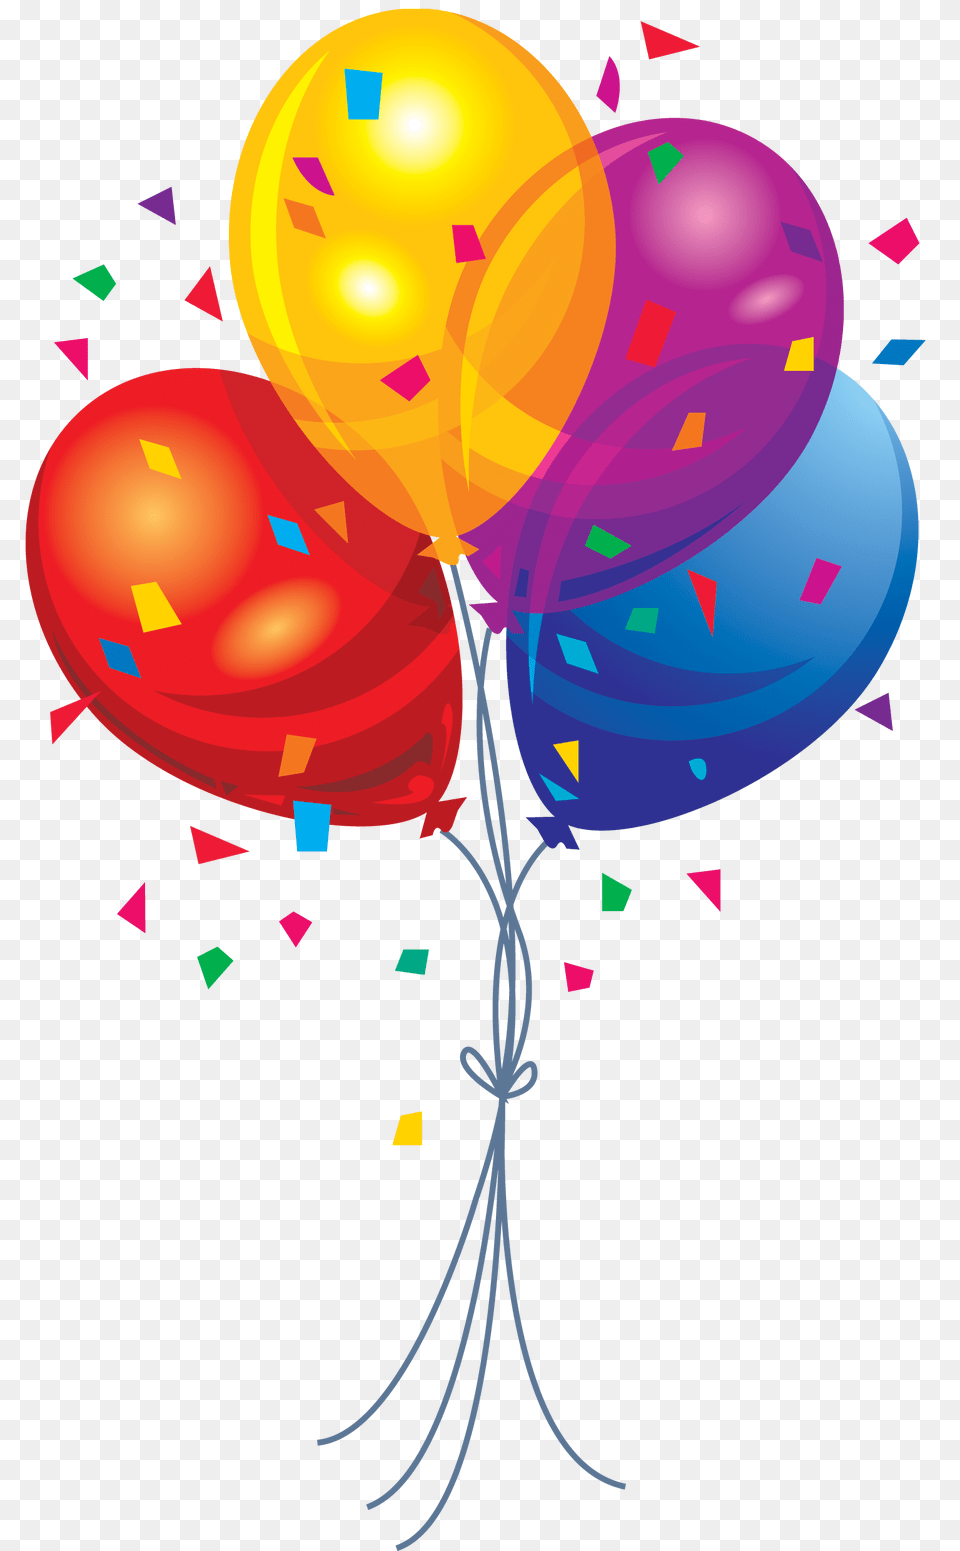 Balloon Images Picture Download With Transparency Free Transparent Png